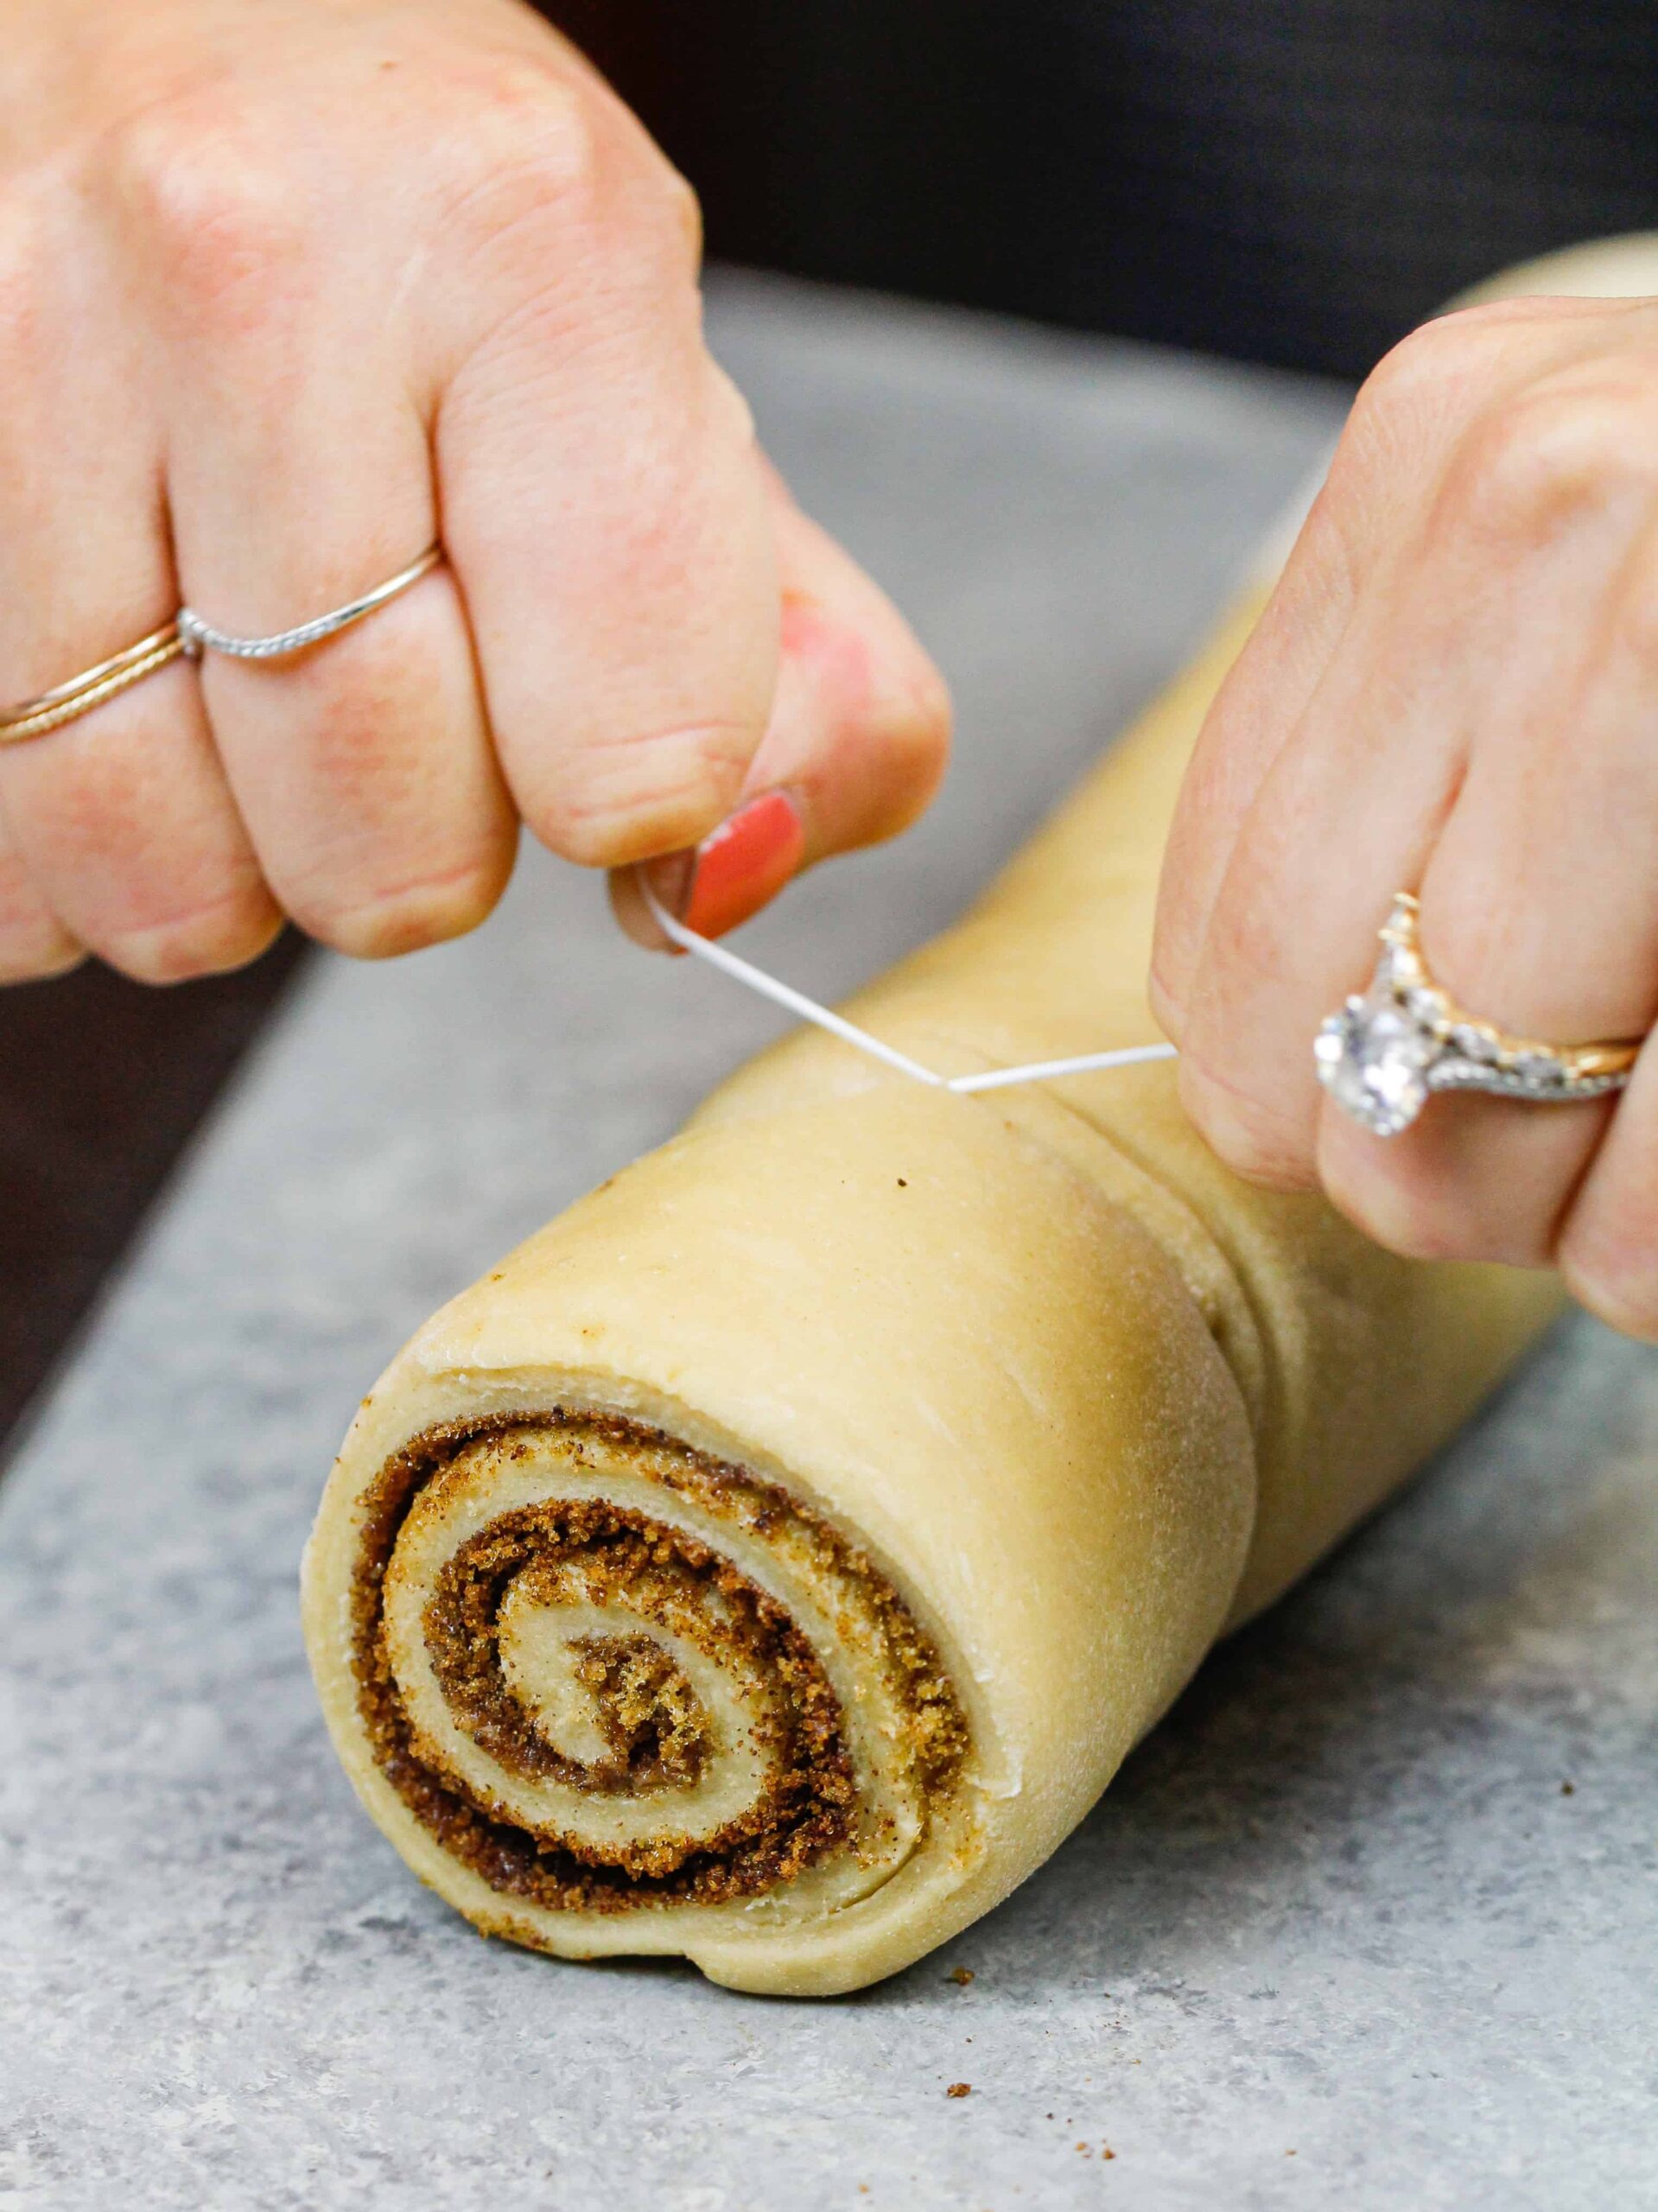 image of quick yeast cinnamon rolls being cut with dental floss